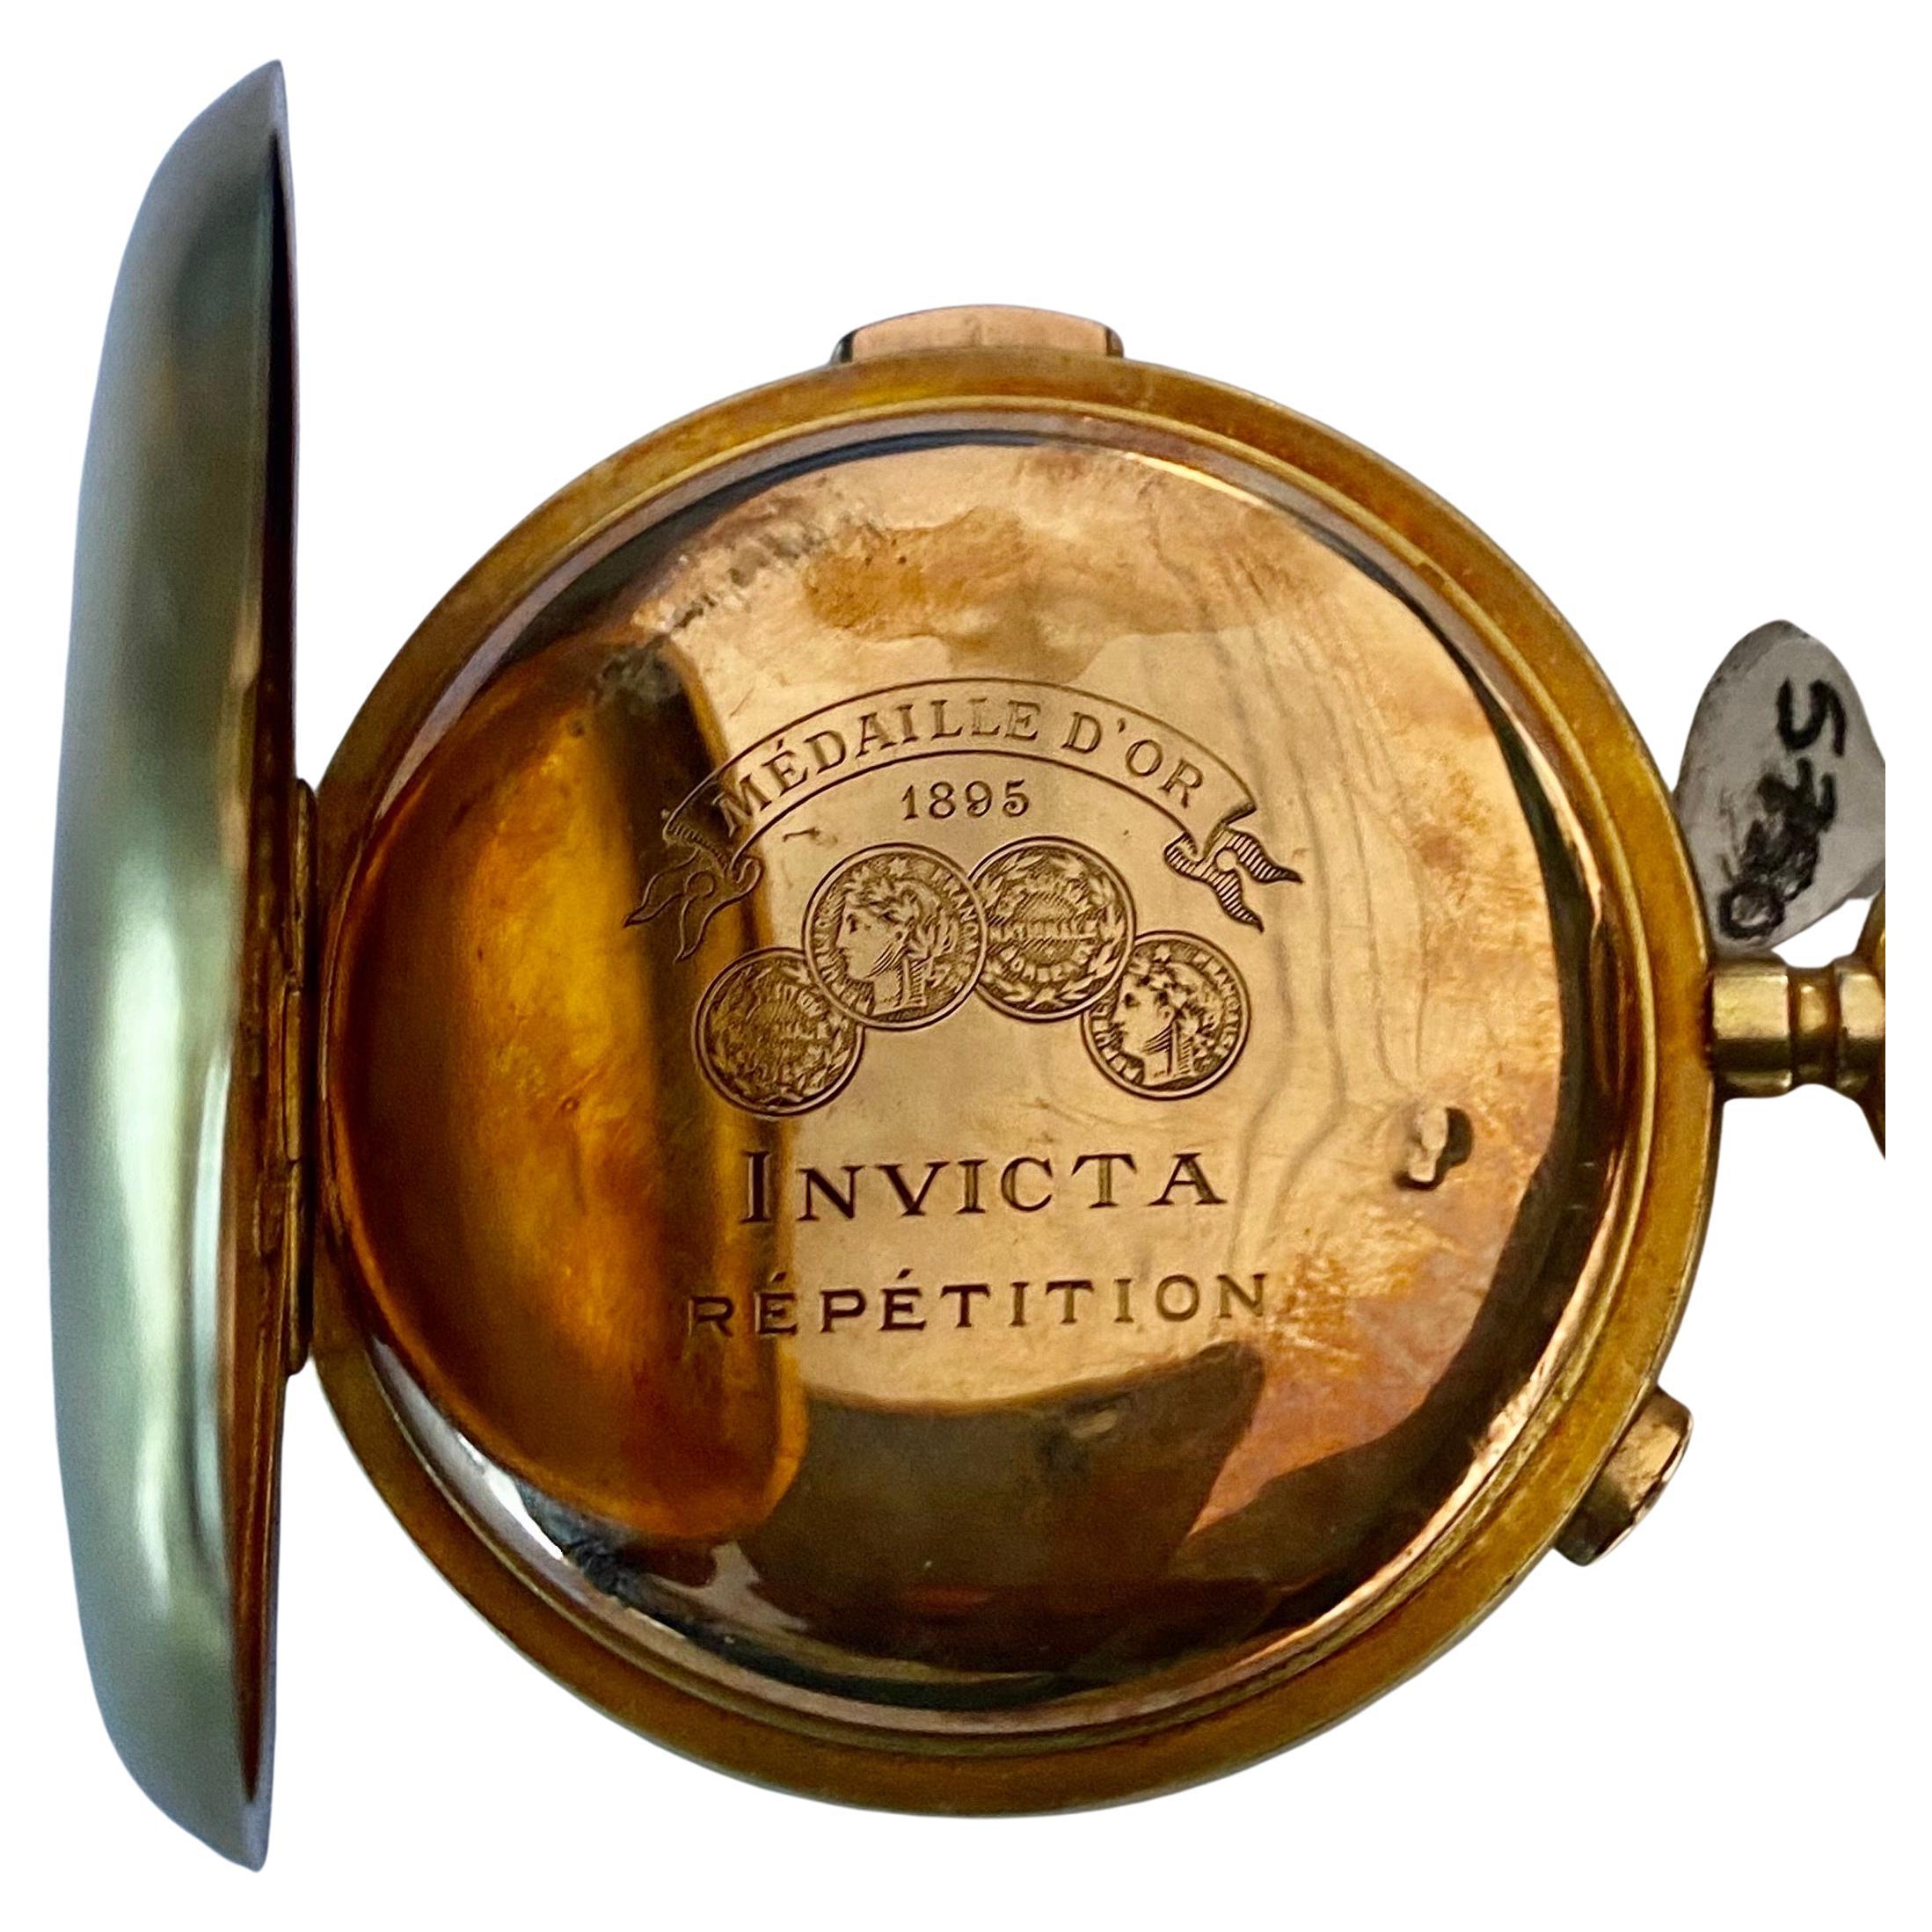 Old European Cut Large Invicta Diamond Crown 14k Gold Minute Repeater Chronograph Pocket Watch For Sale